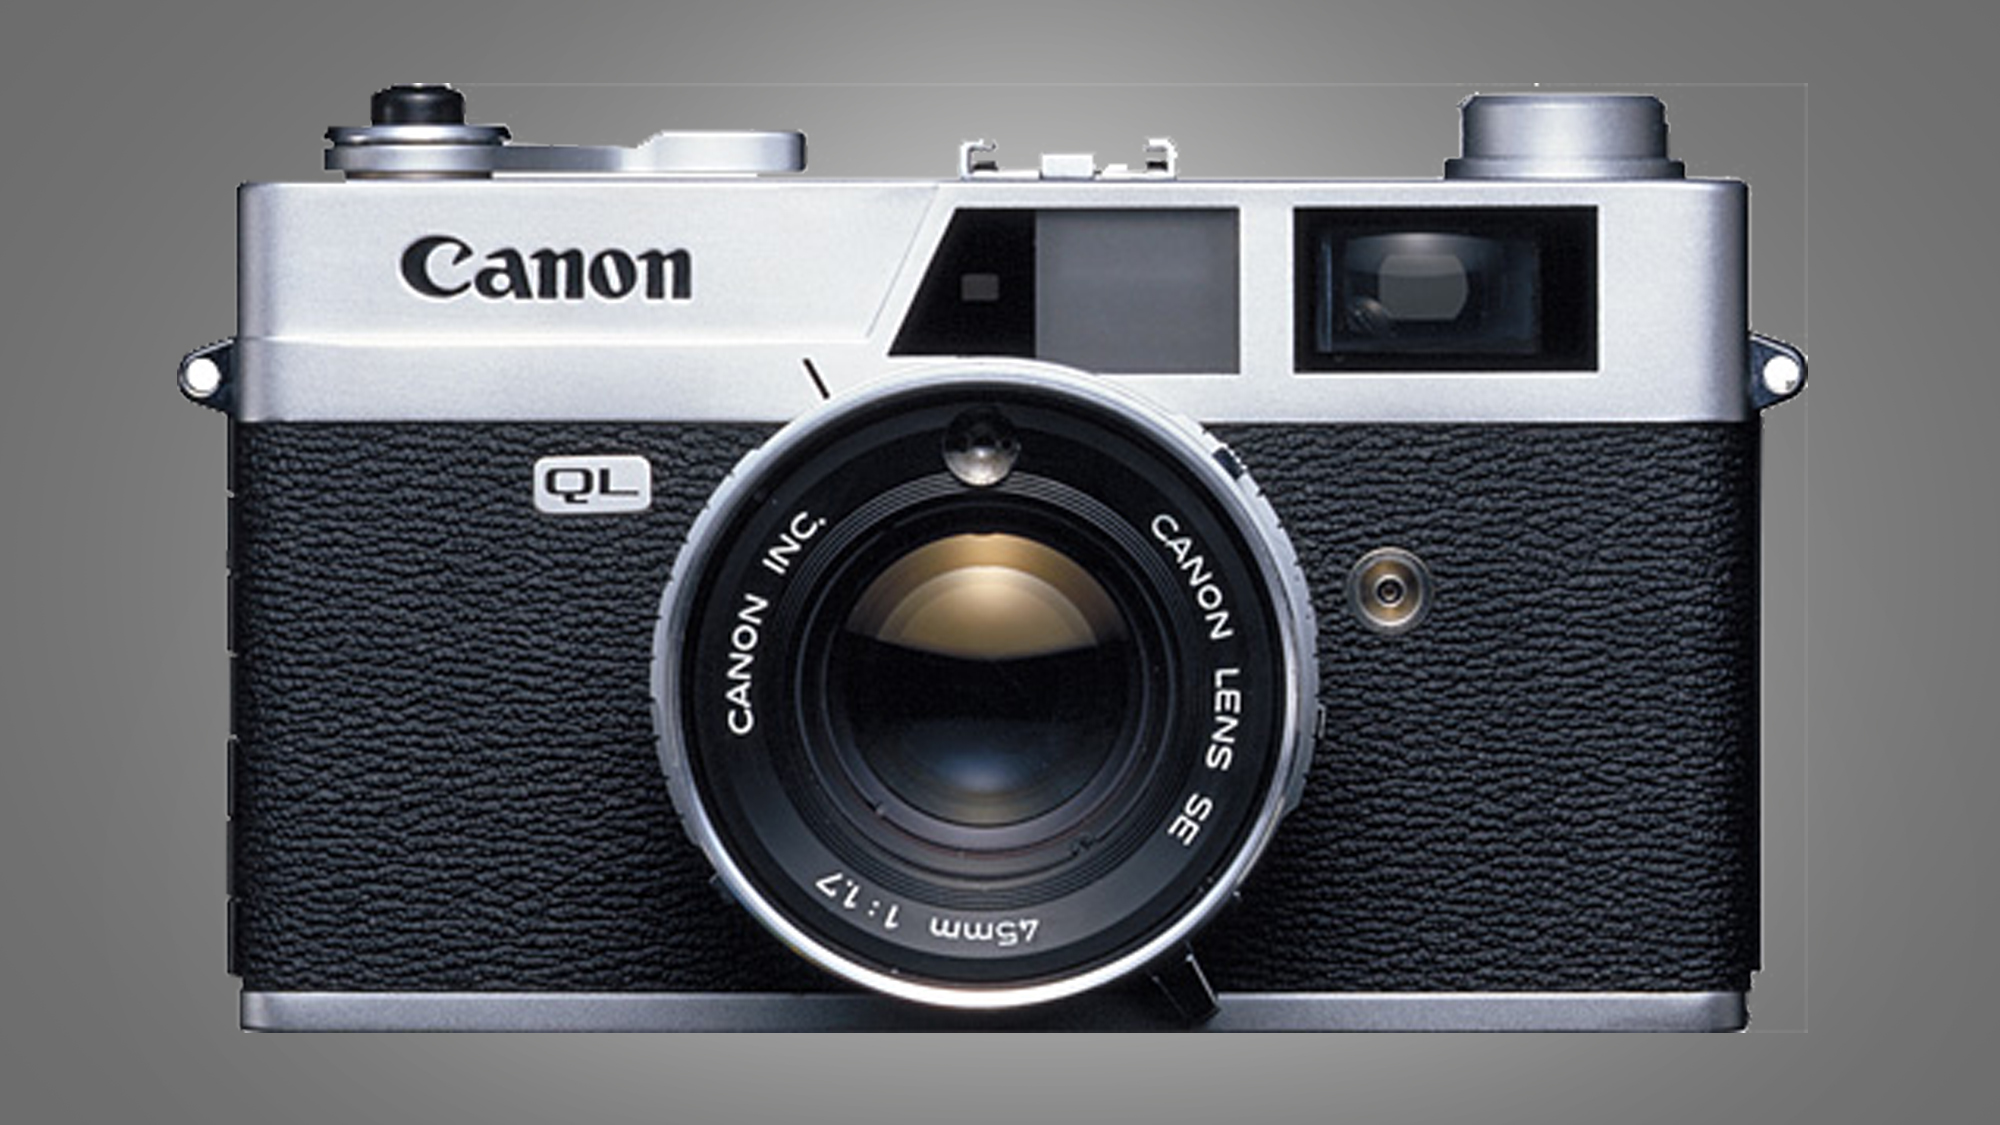 The Canon QL17 camera on a grey background